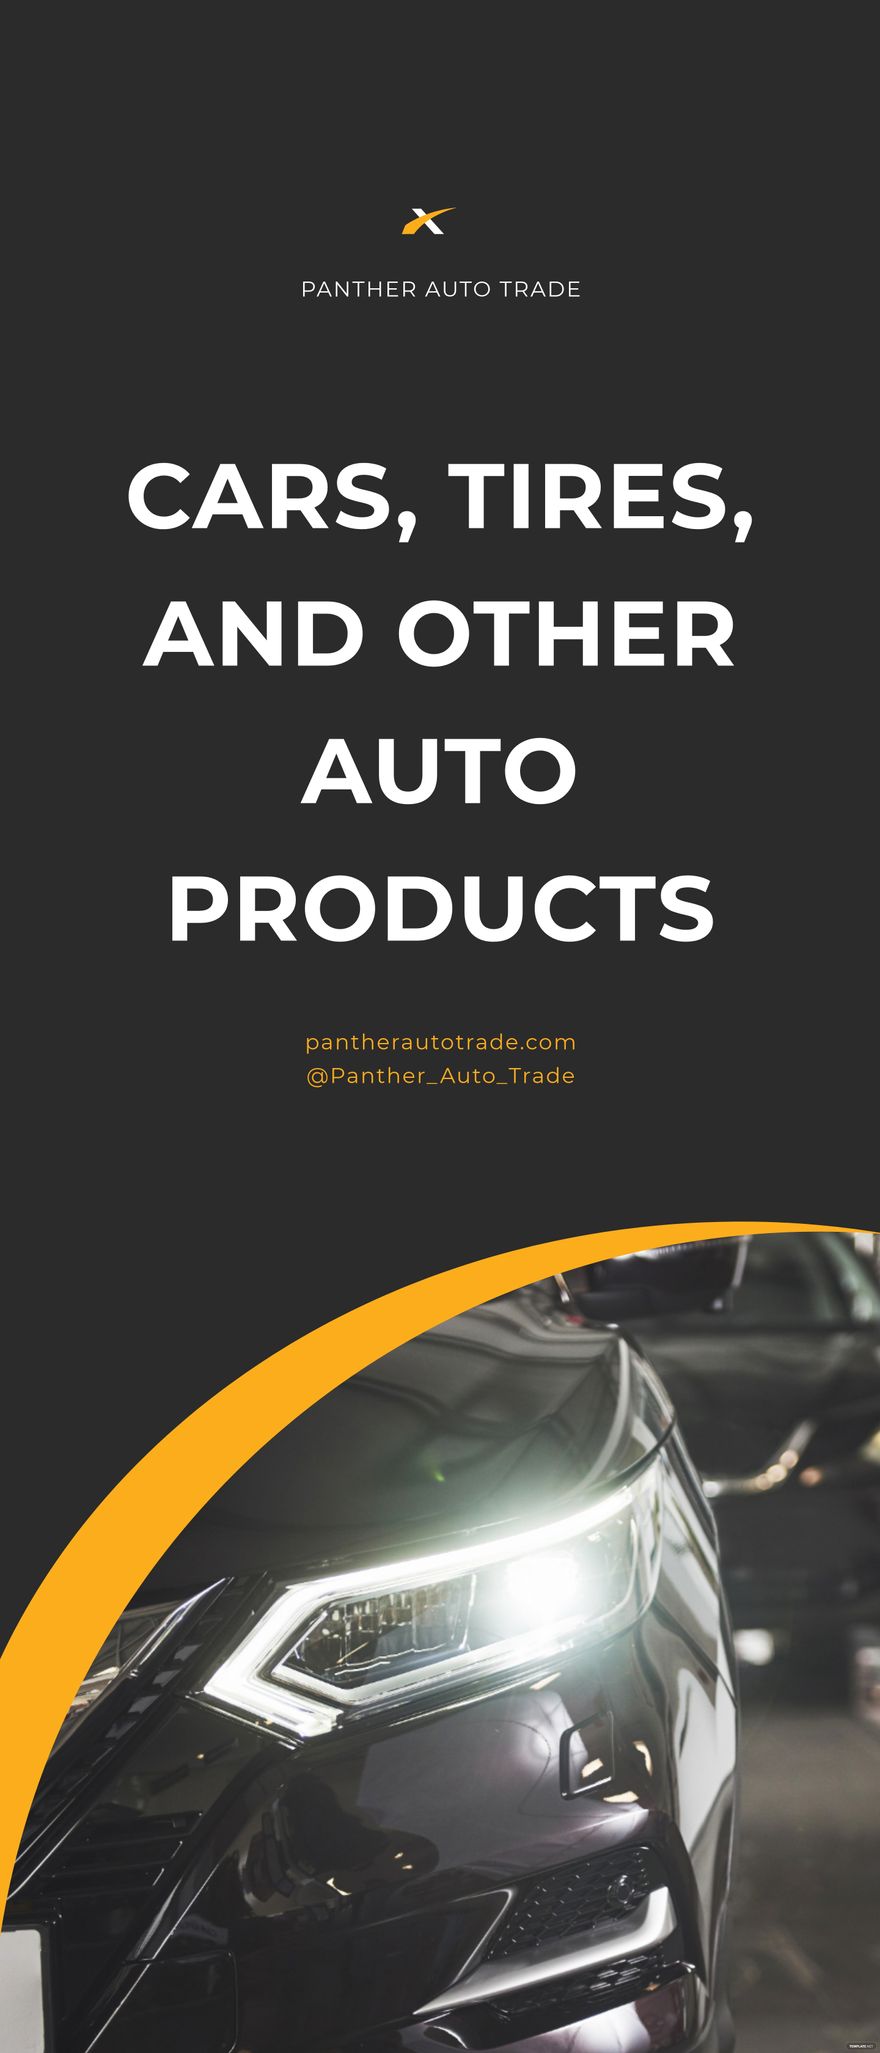 Auto Store Roll-up Banner Template in Word, Google Docs, Apple Pages, Publisher